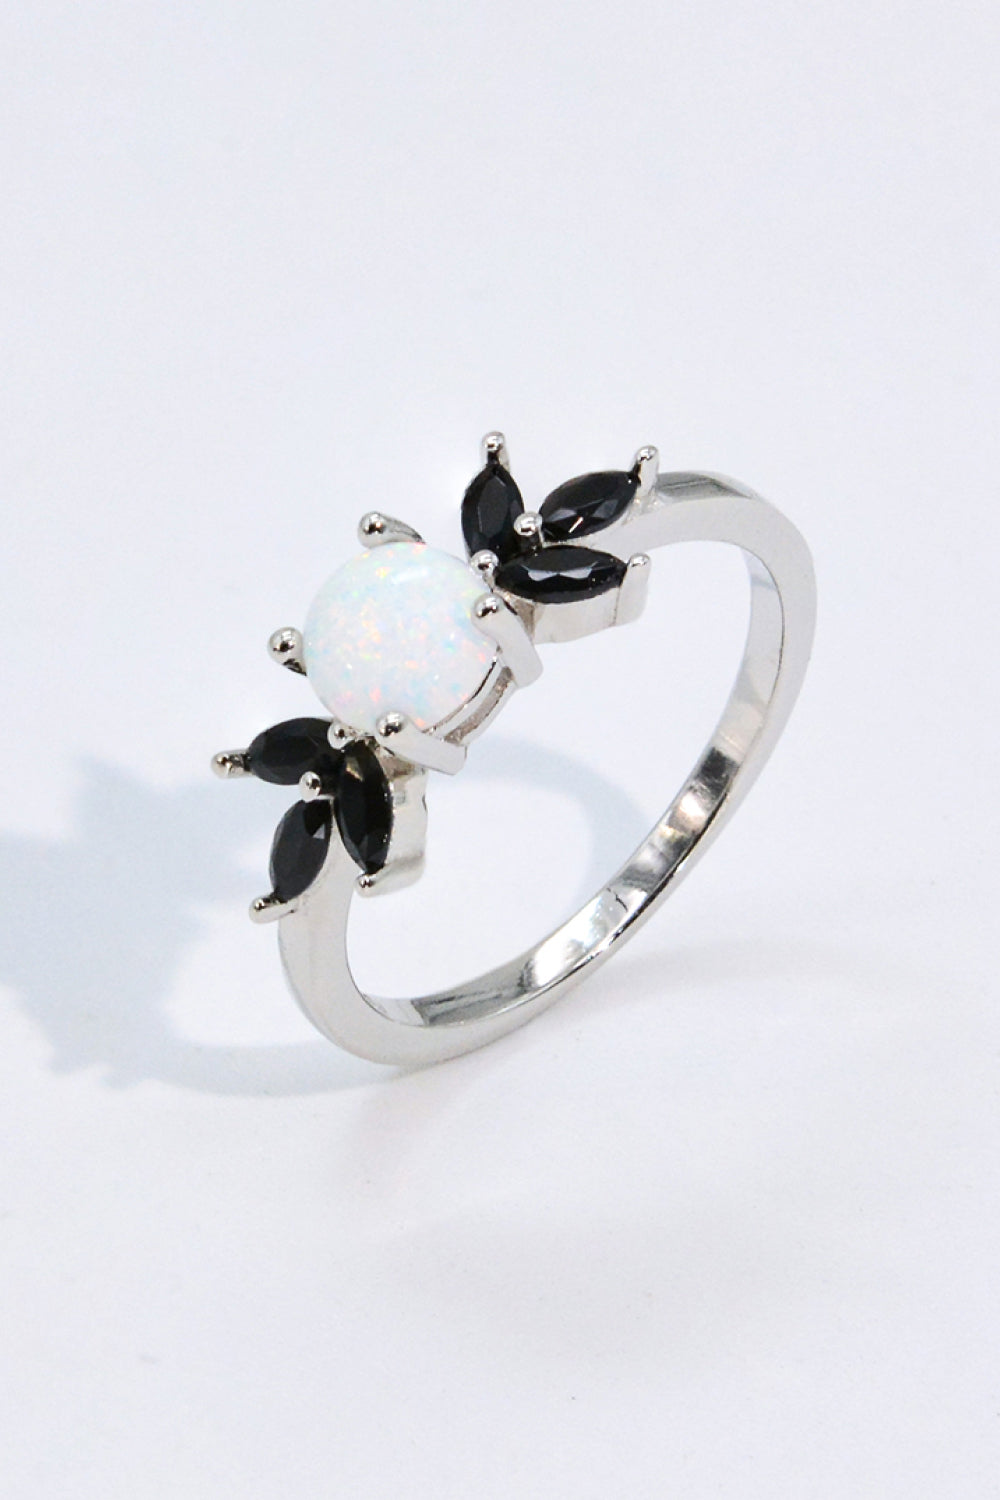 Opal and Zircon Contrast Ring - Tophatter Deals